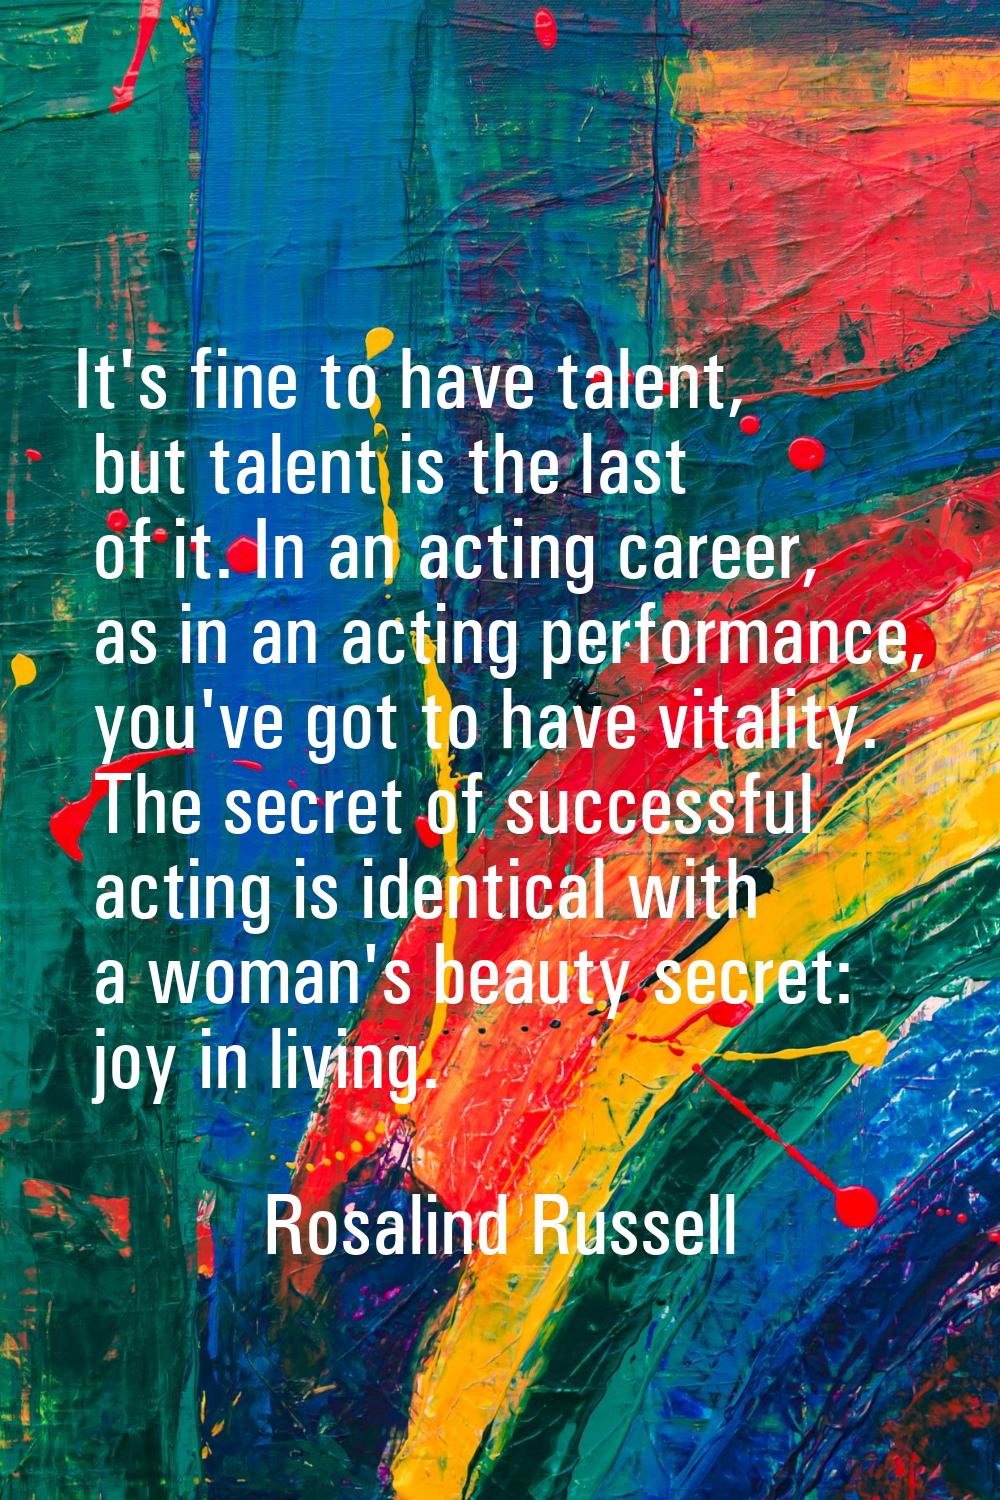 It's fine to have talent, but talent is the last of it. In an acting career, as in an acting perfor